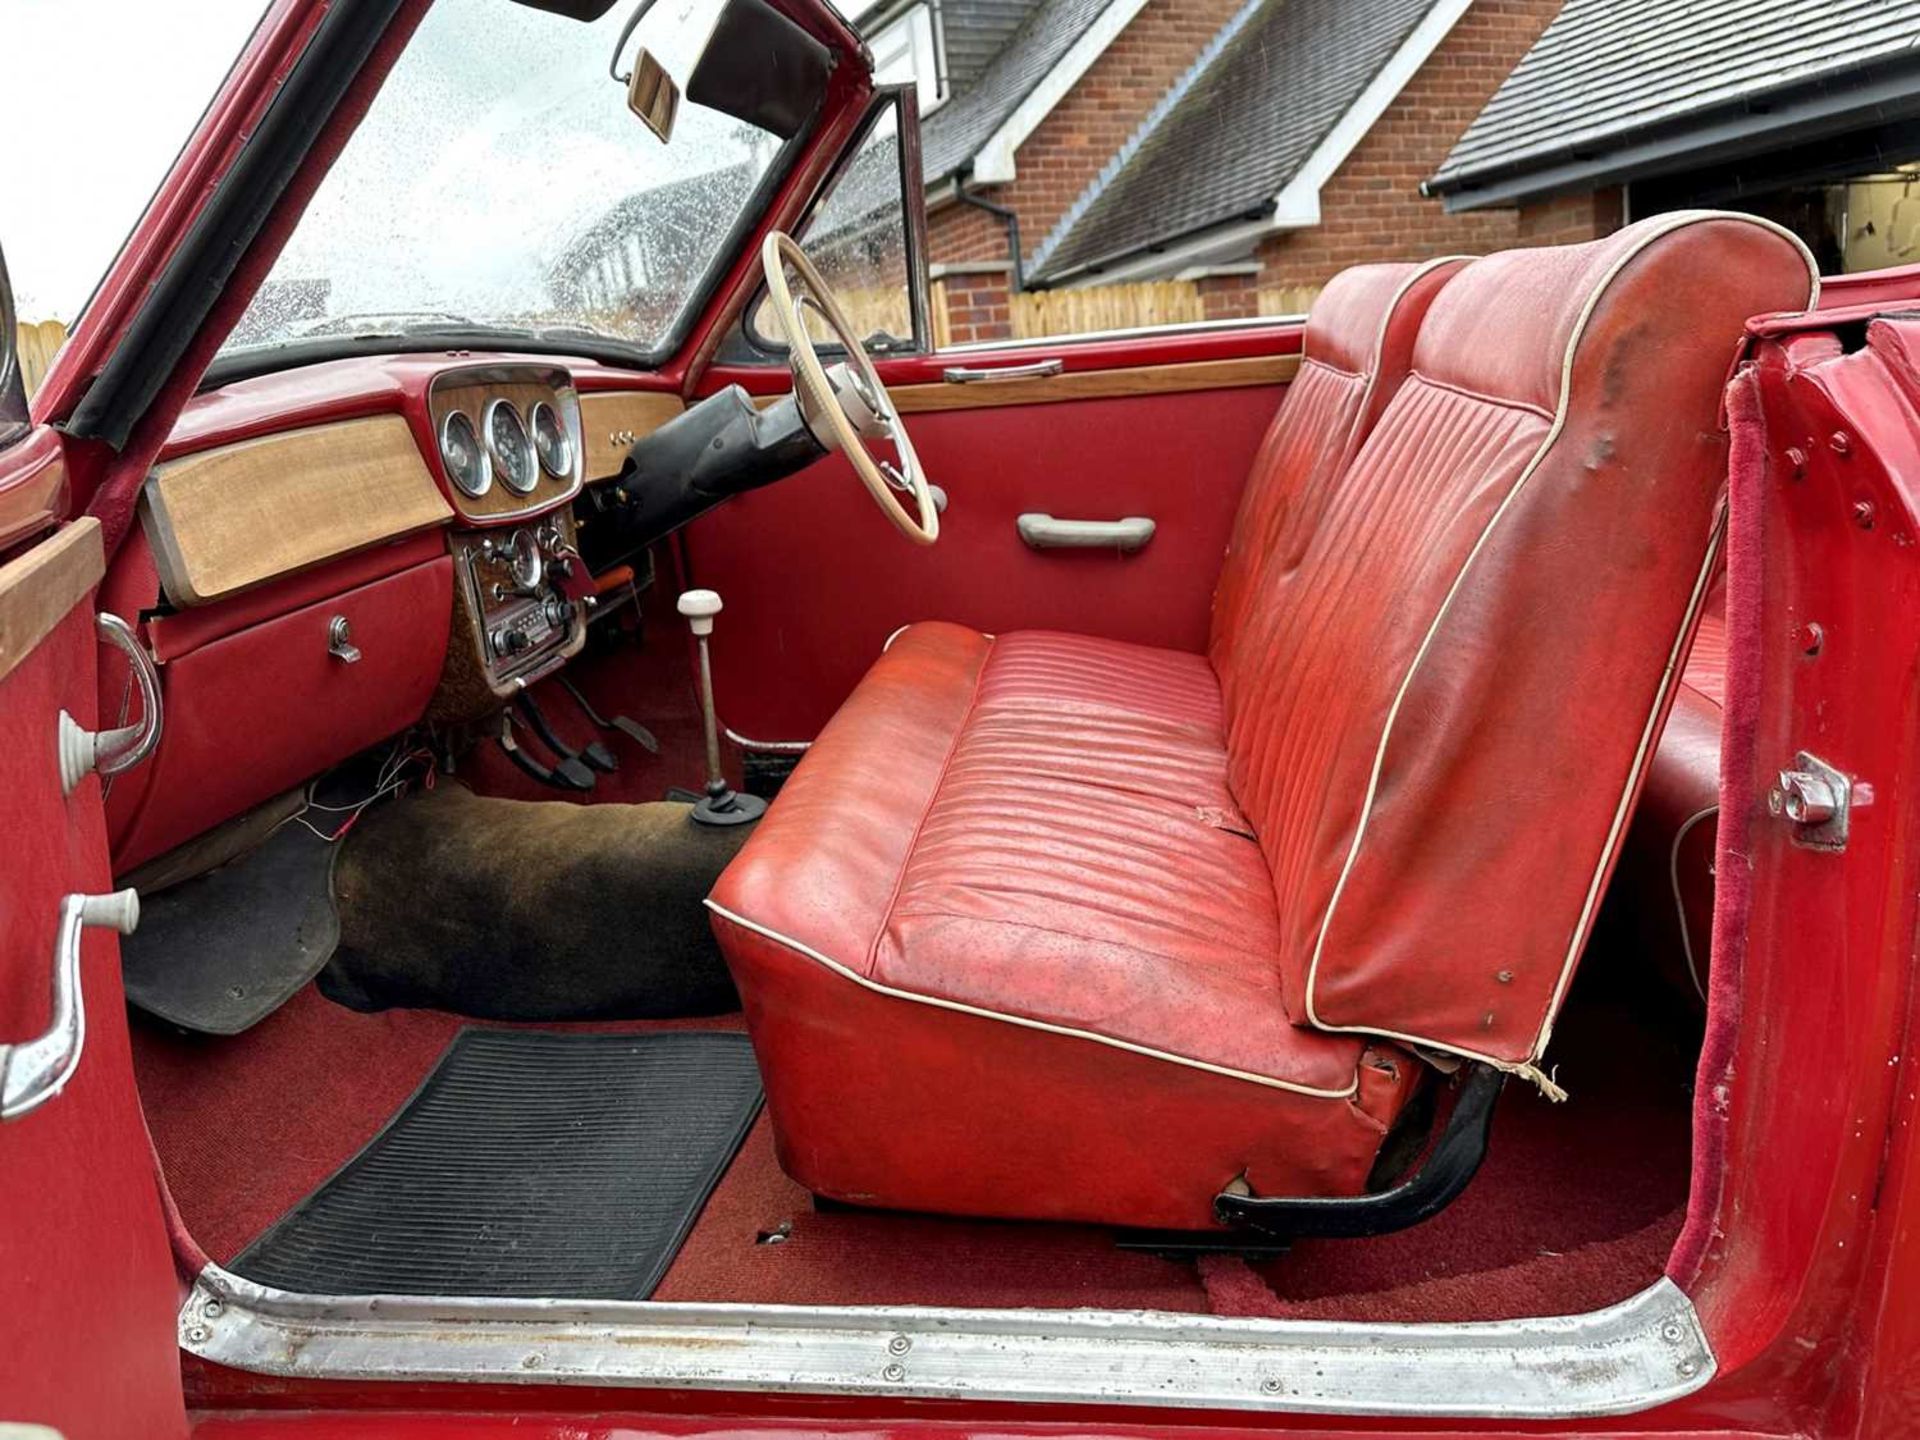 1961 Singer Gazelle Convertible Comes complete with overdrive, period radio and badge bar - Image 44 of 95